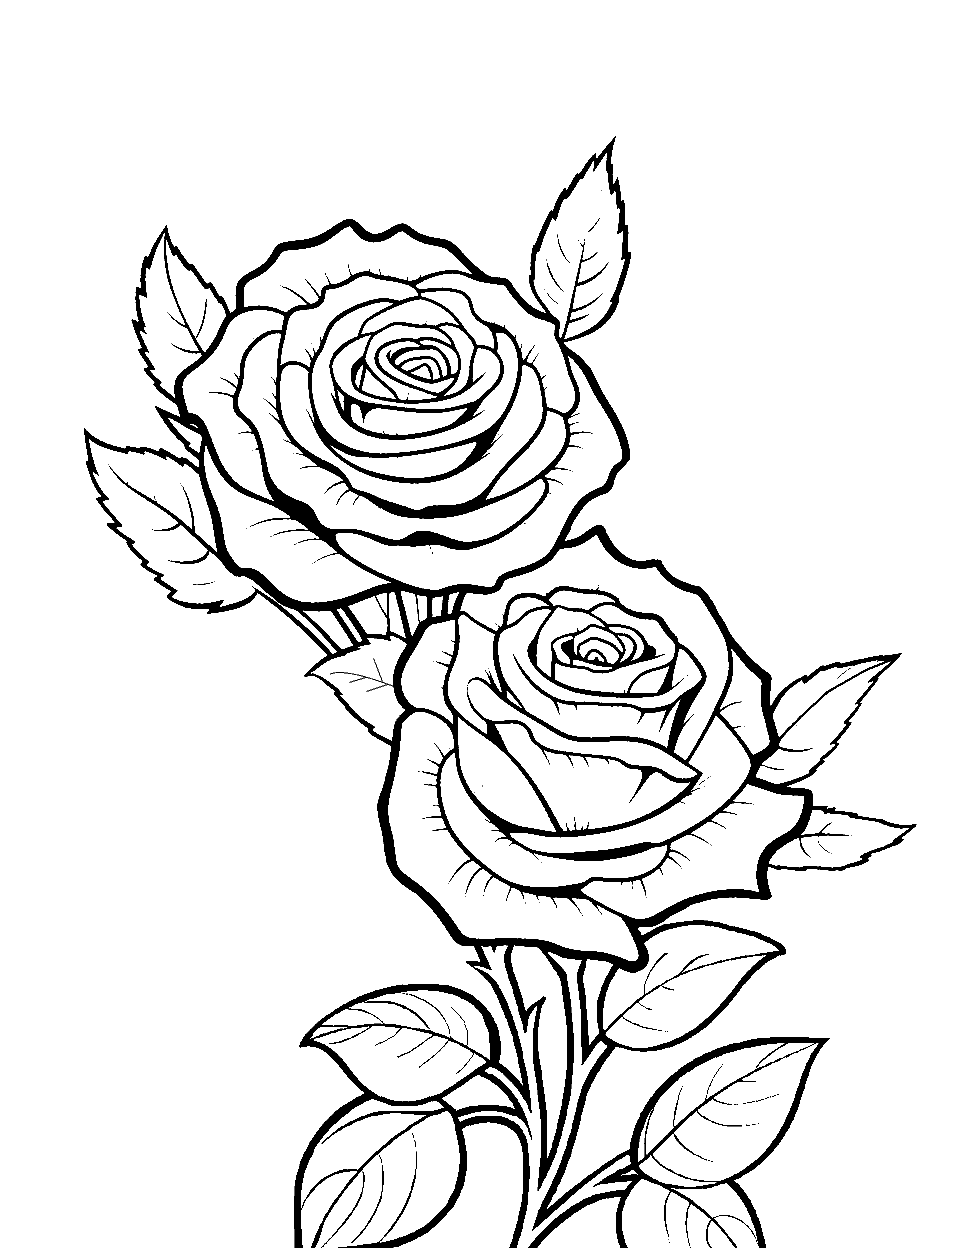 Aesthetic Rose Arrangement Coloring Page - An aesthetic arrangement of two roses evoking calm and serenity.